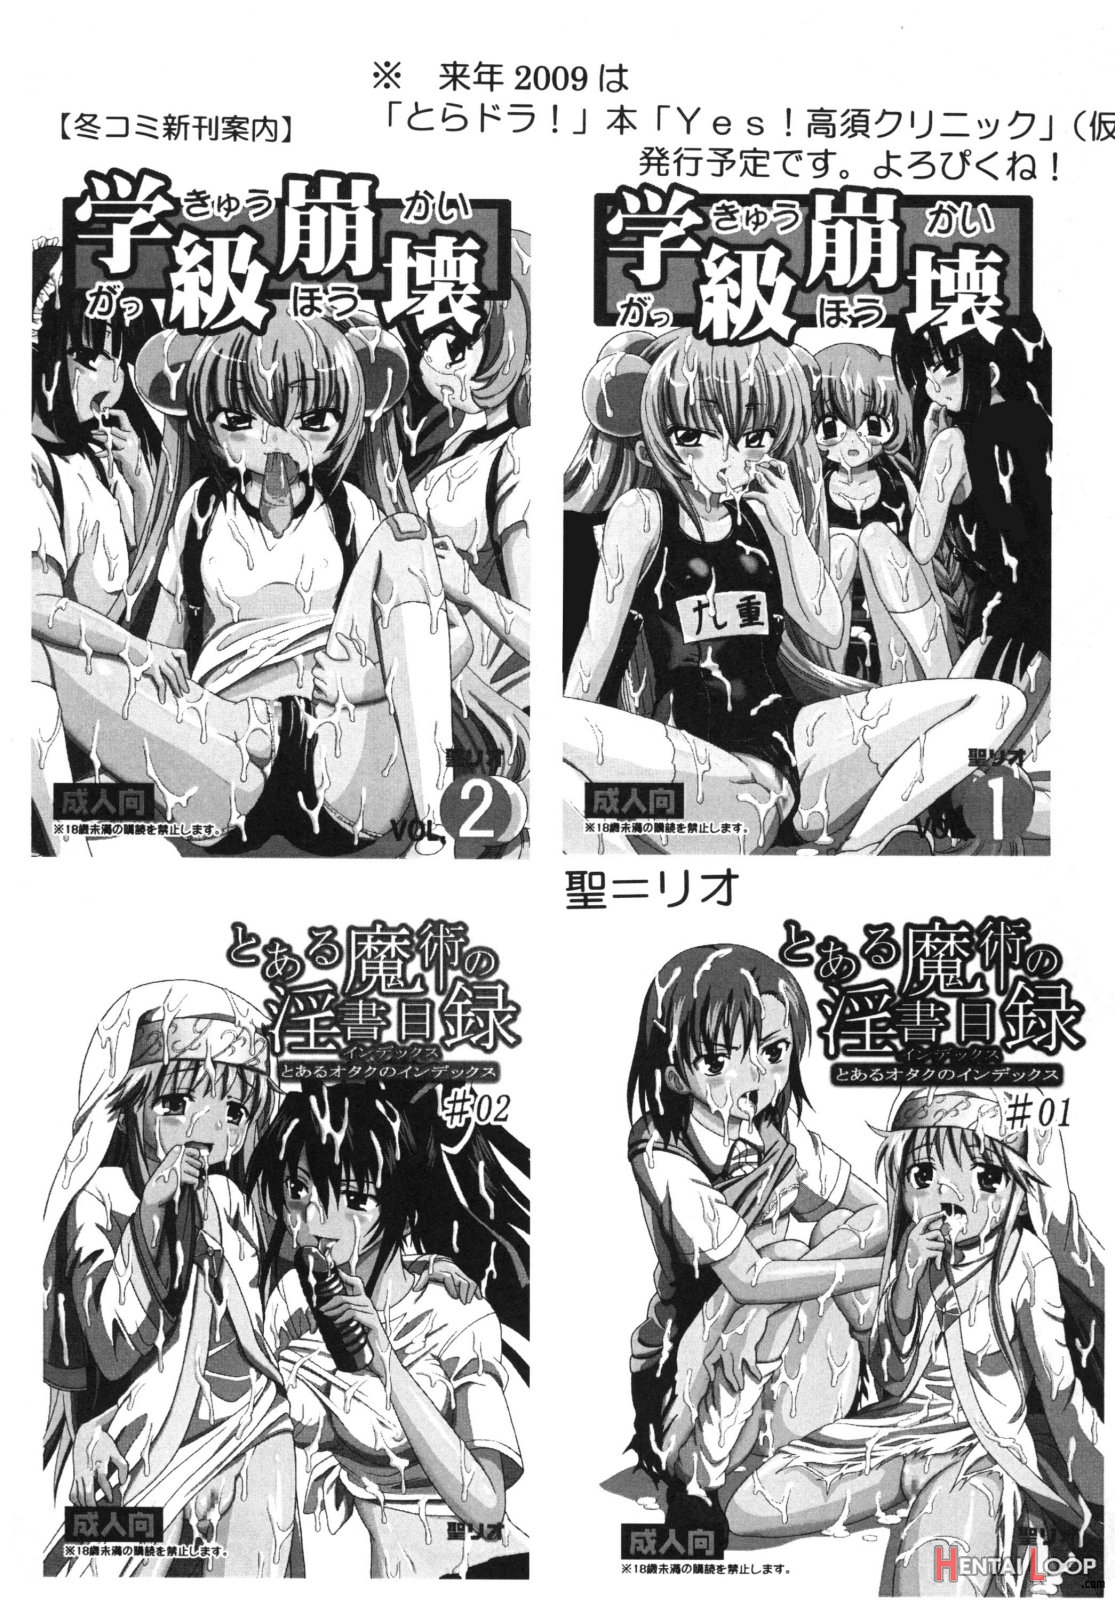 A Certain Magical Lewd Index #2 page 49